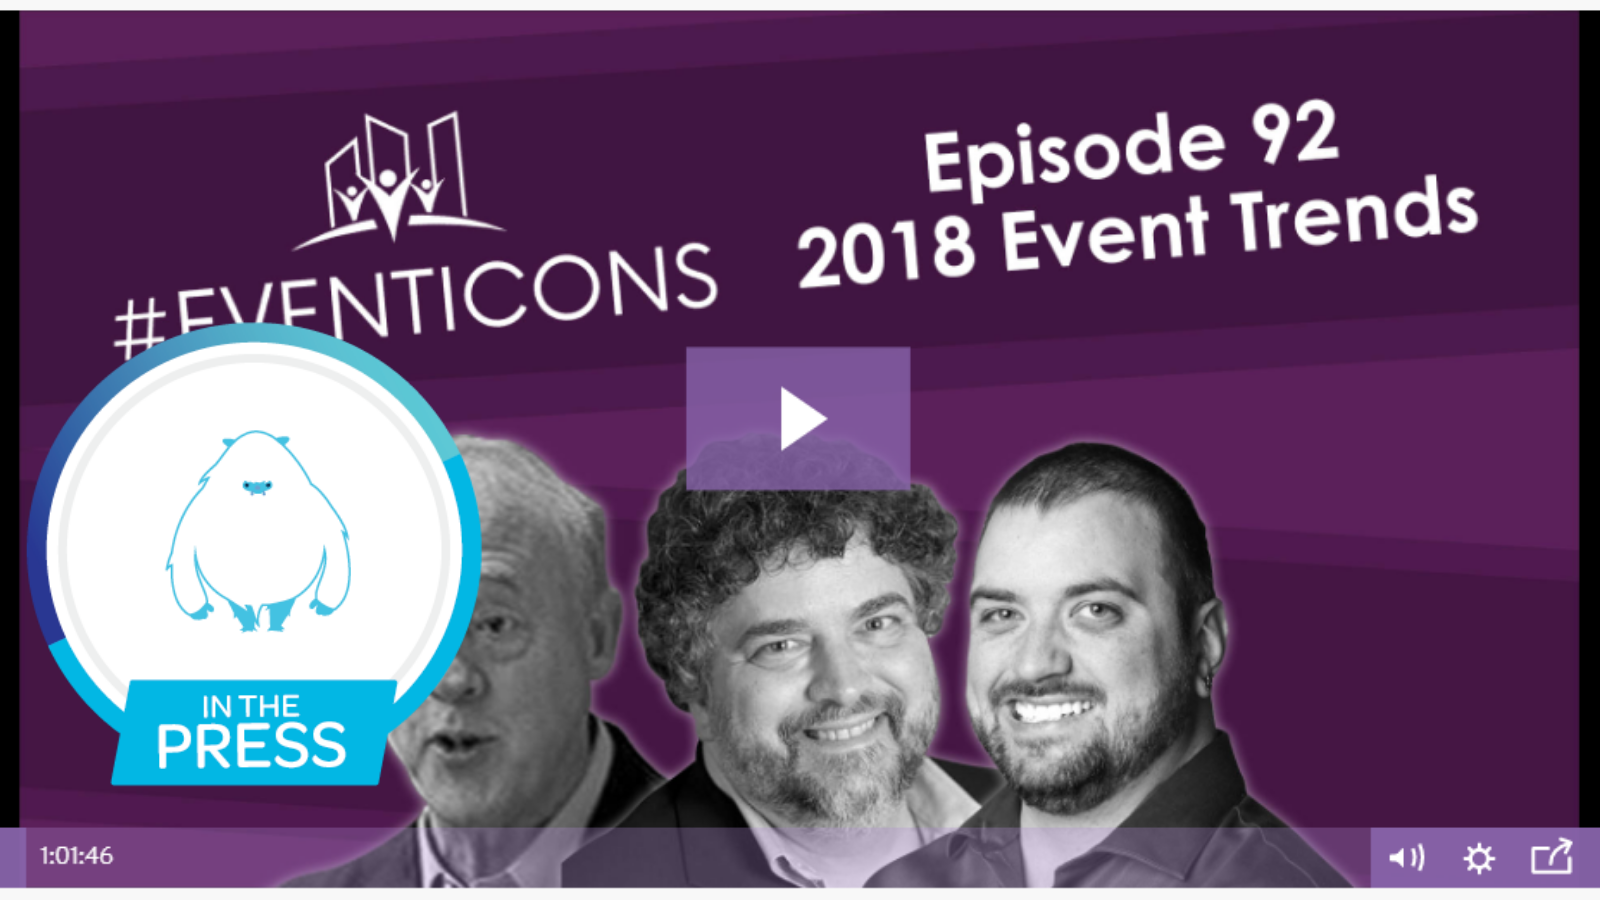 2018 Event Industry Trends – #EventIcons Episode 92 by Endless Events